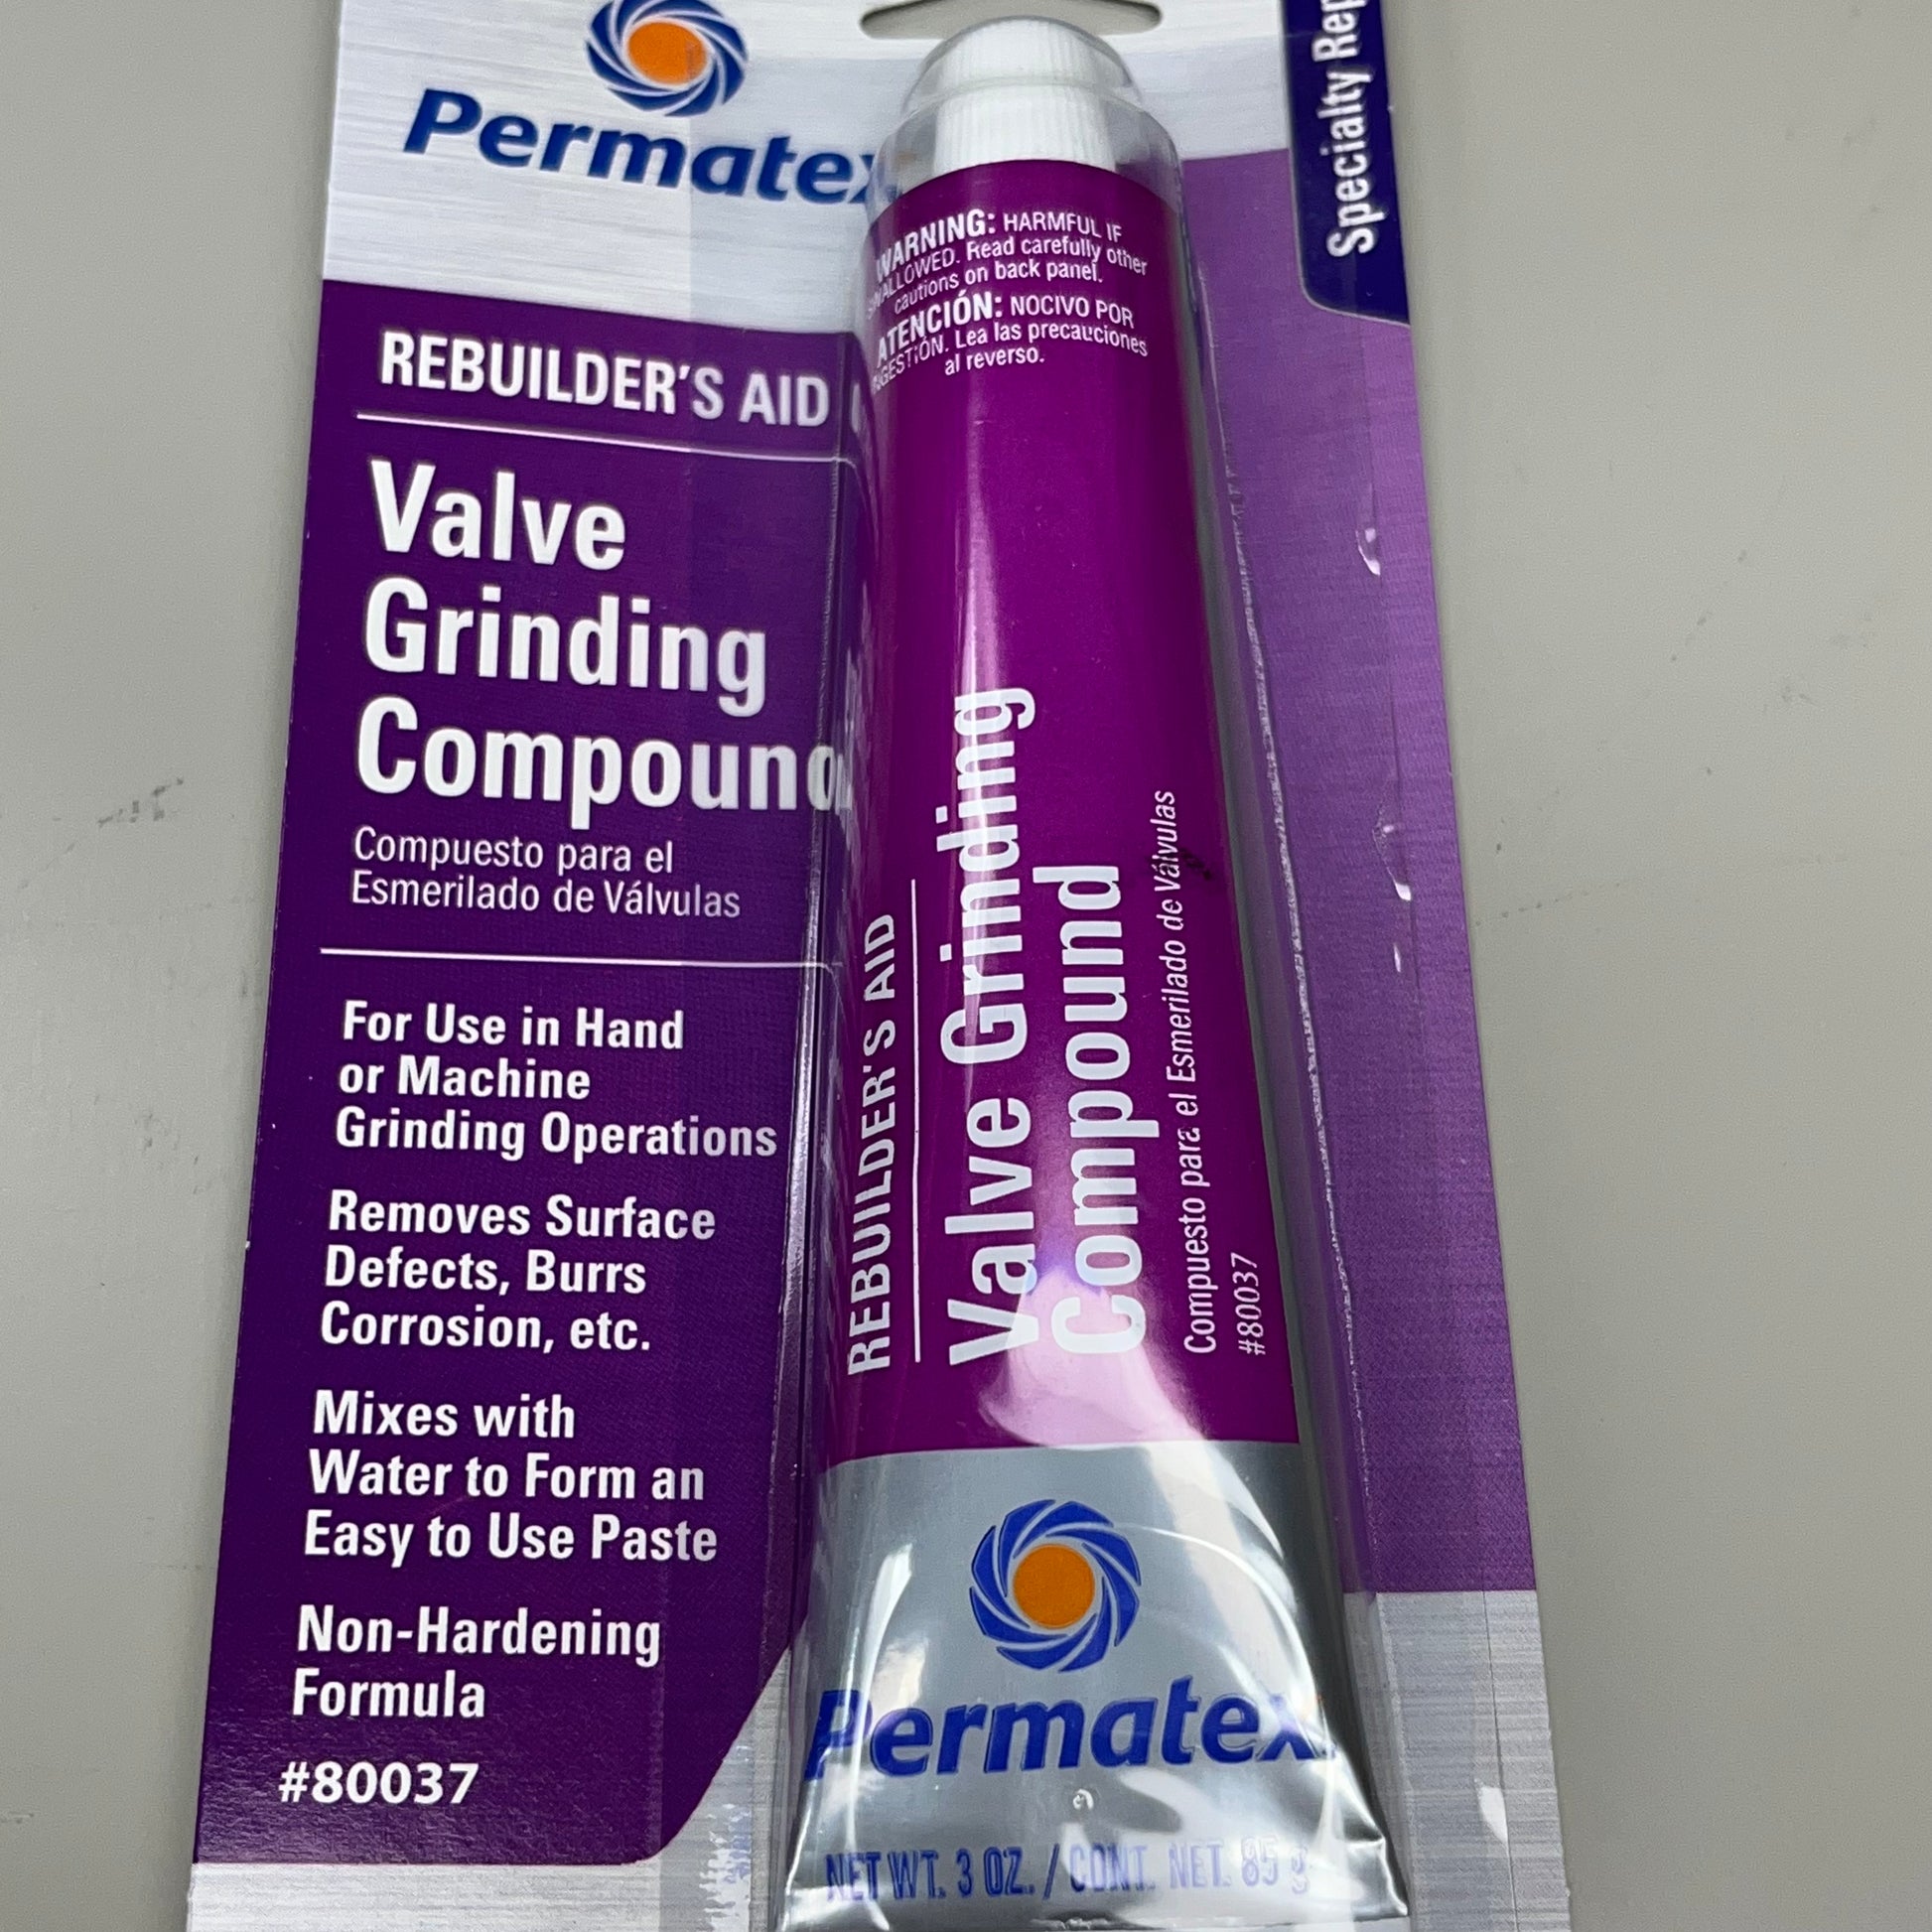 PERMATEX 2-PACK! Valve Grinding Compound Non-Hardening Compound 80037 –  PayWut